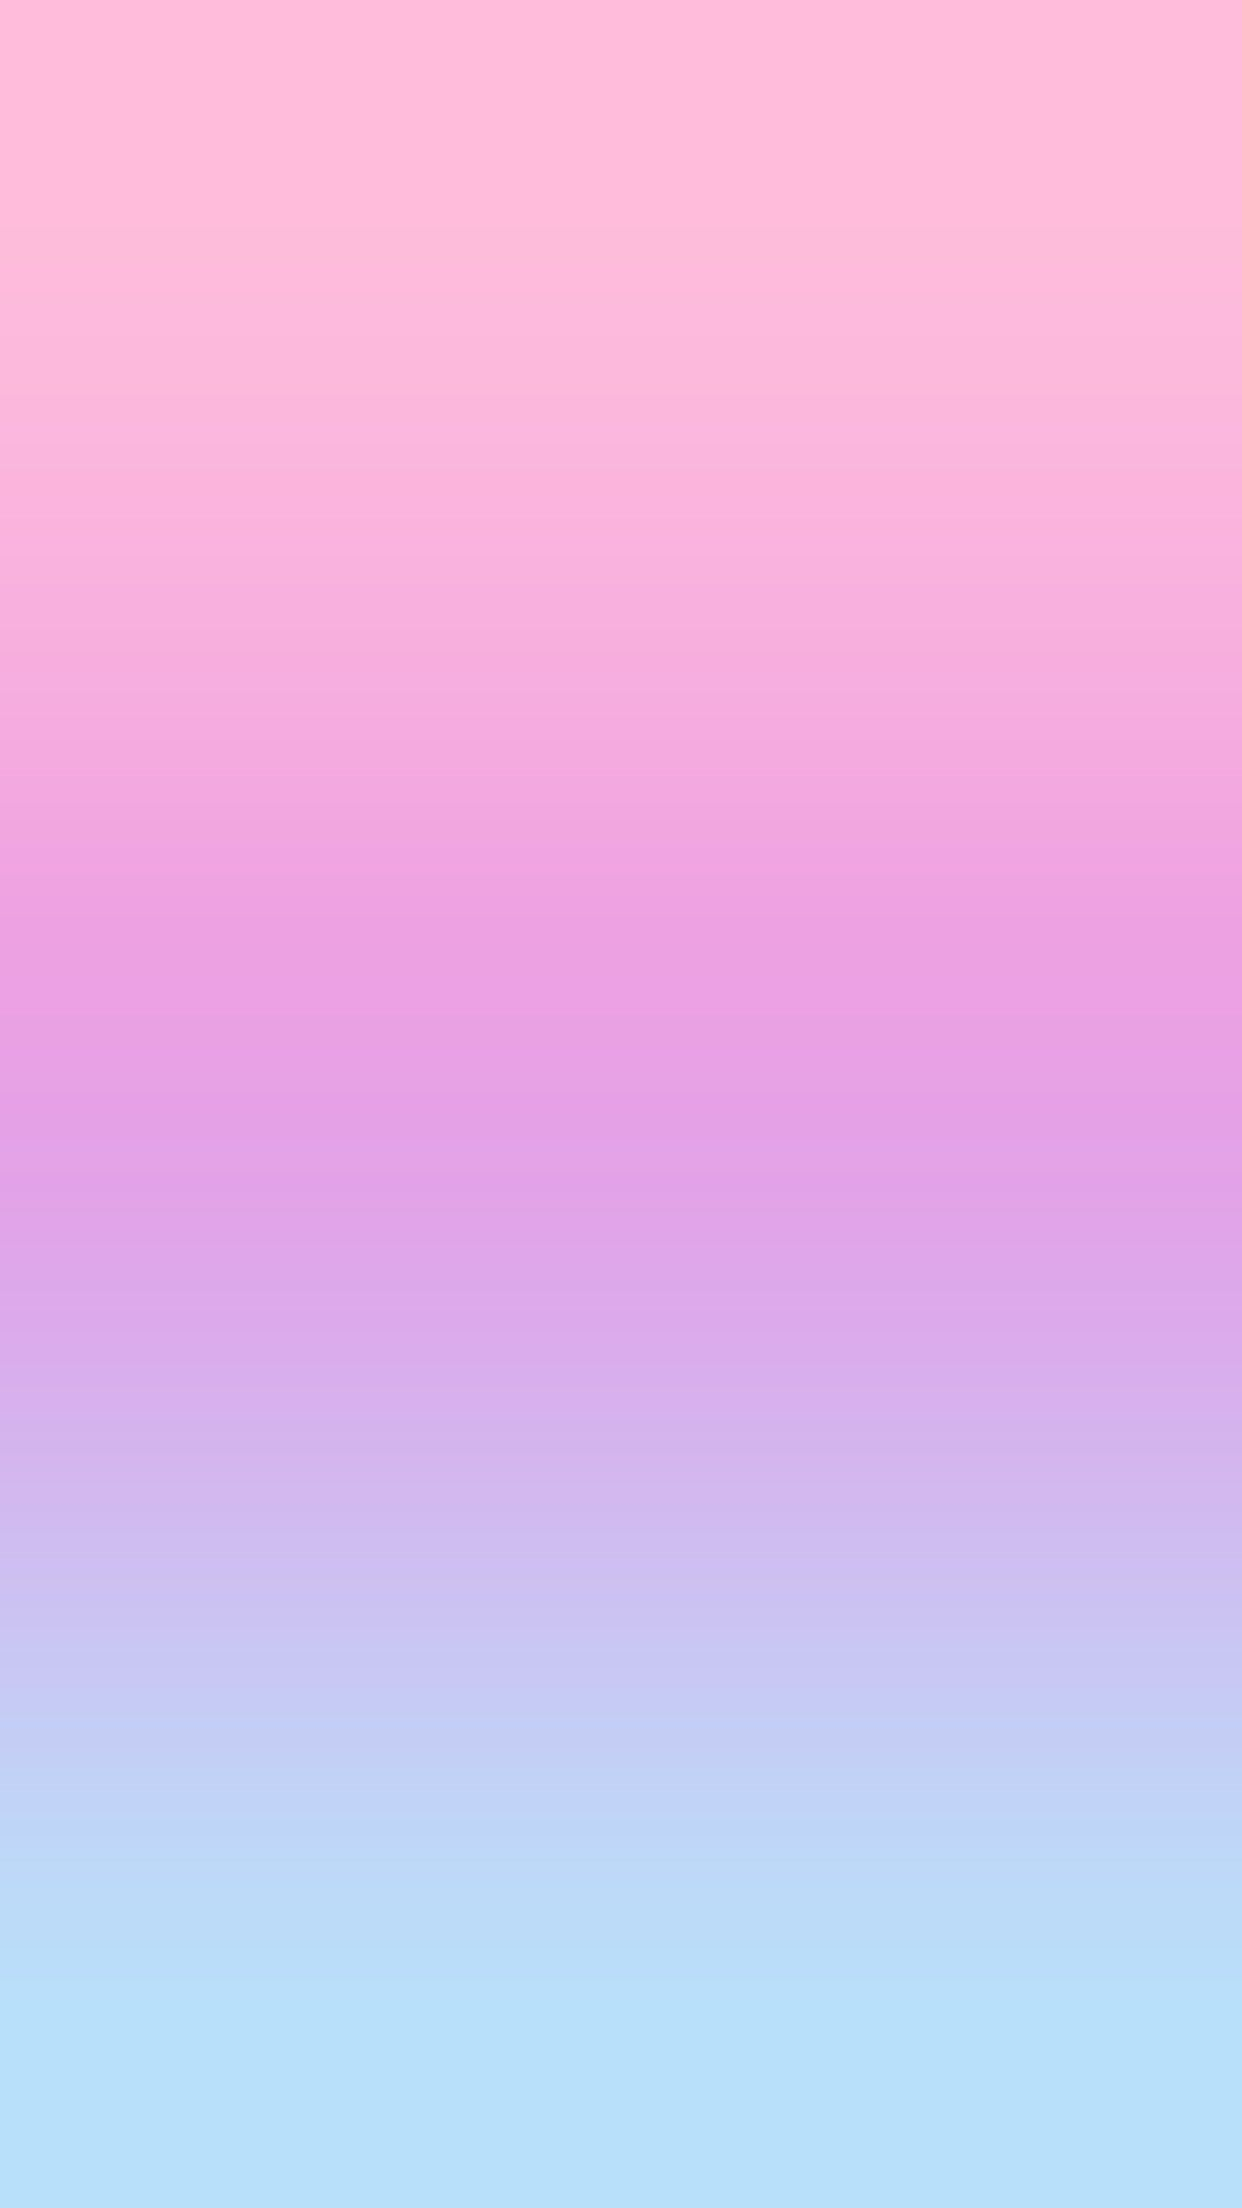 1242x2208 Pastel Blue and Pink Wallpapers Top Free Pastel Blue and Pink Backgrounds